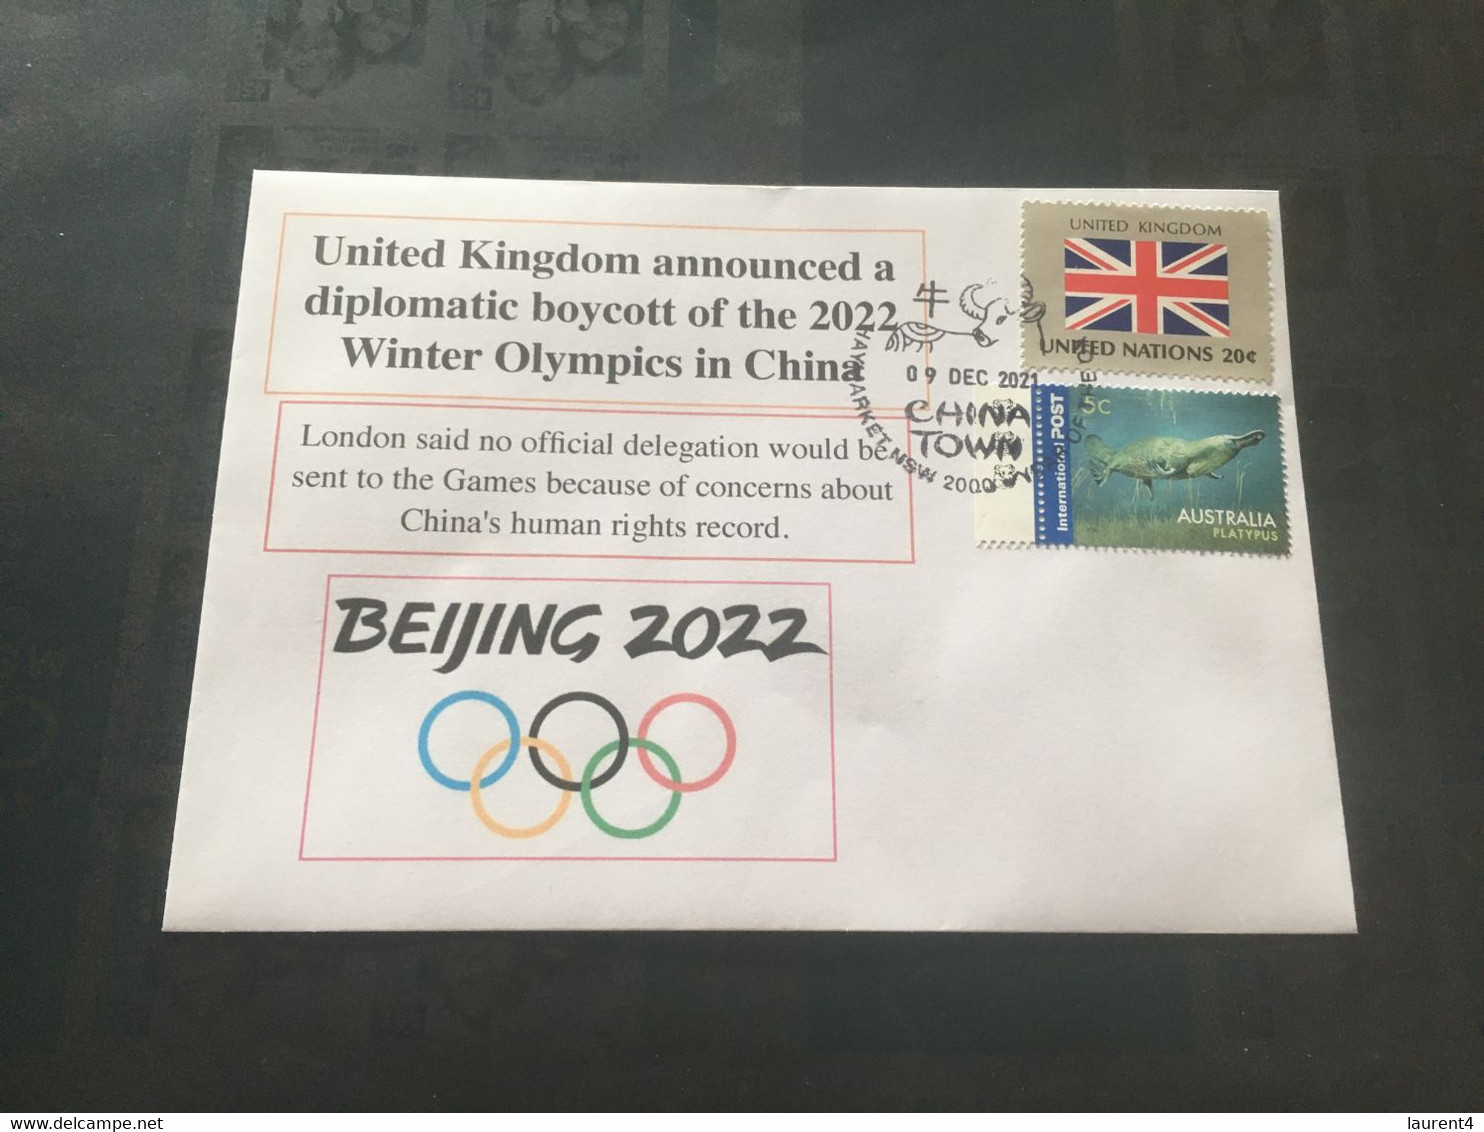 (5 D 11) 9-12-2021 - UK Diplomatic Boycott Of China 2022 Winter Olympic Games Announced (Japan Flag UN Stamp) - Winter 2022: Beijing